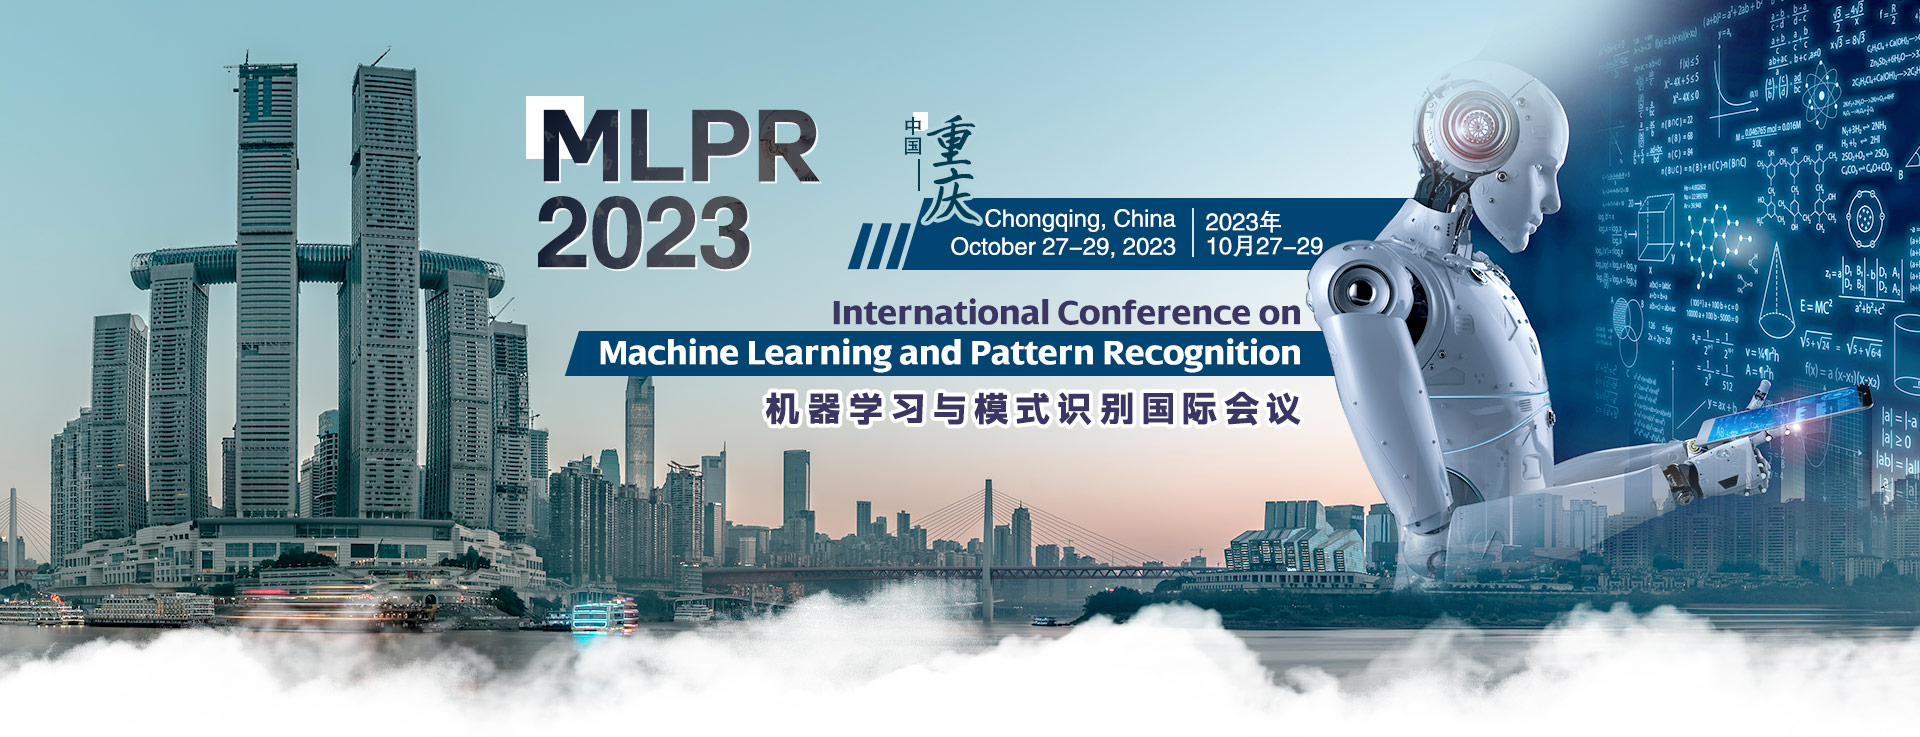 The International Conference on Machine Learning and Pattern Recognition MLPR 2023